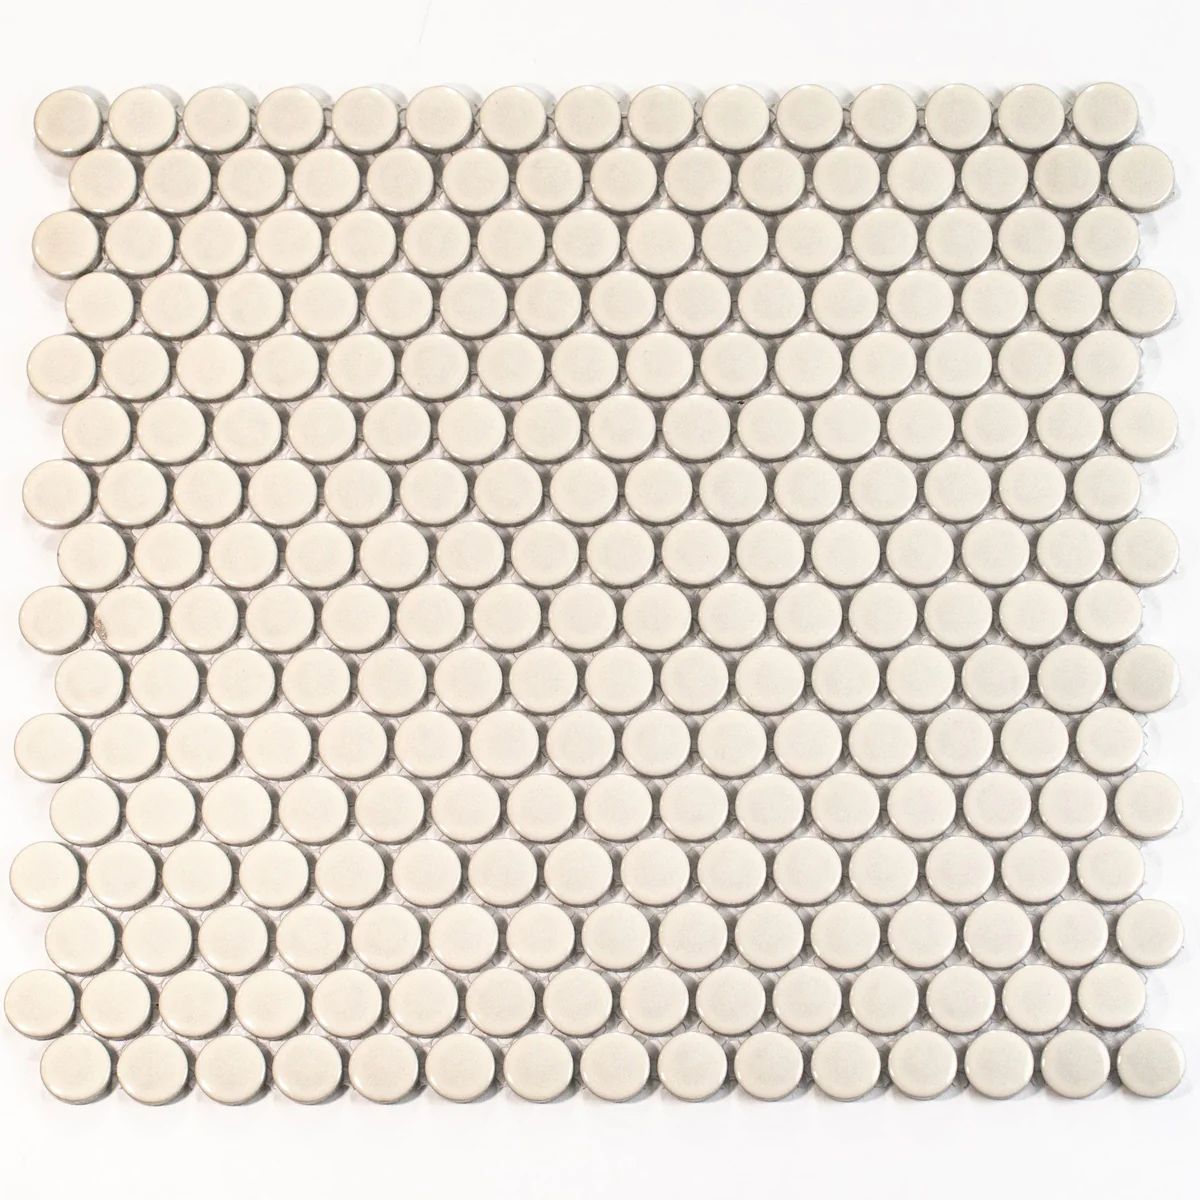 Glossy Cream Buttons Porcelain Penny Round Tile | Tile Club